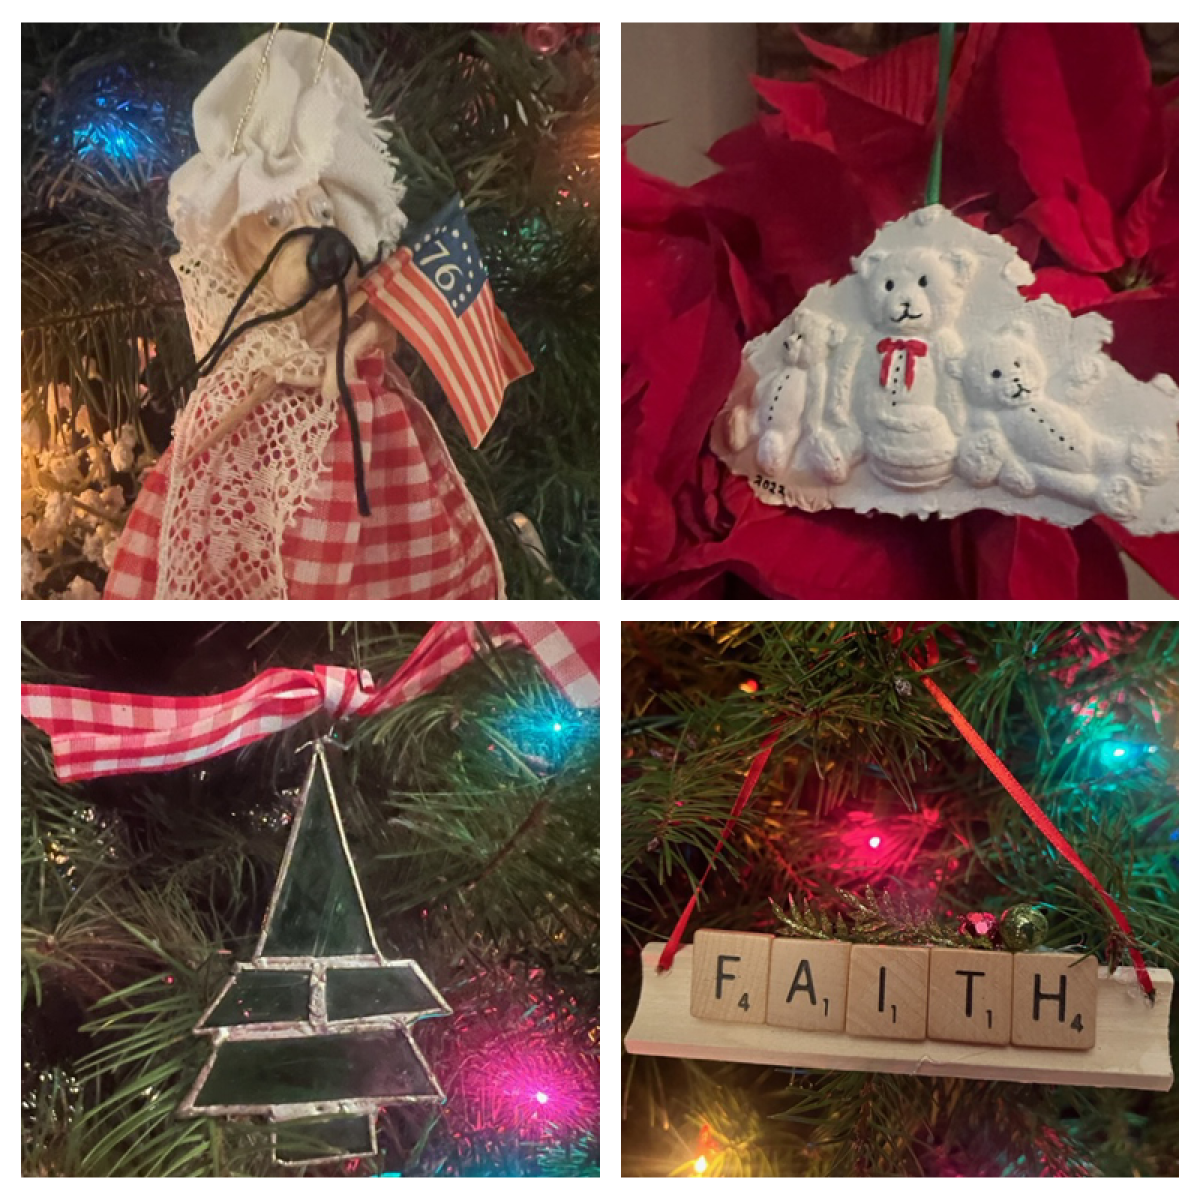 A sampling of Christmas ornaments that have been given out at the O'Meara party in Costa Mesa over the years.